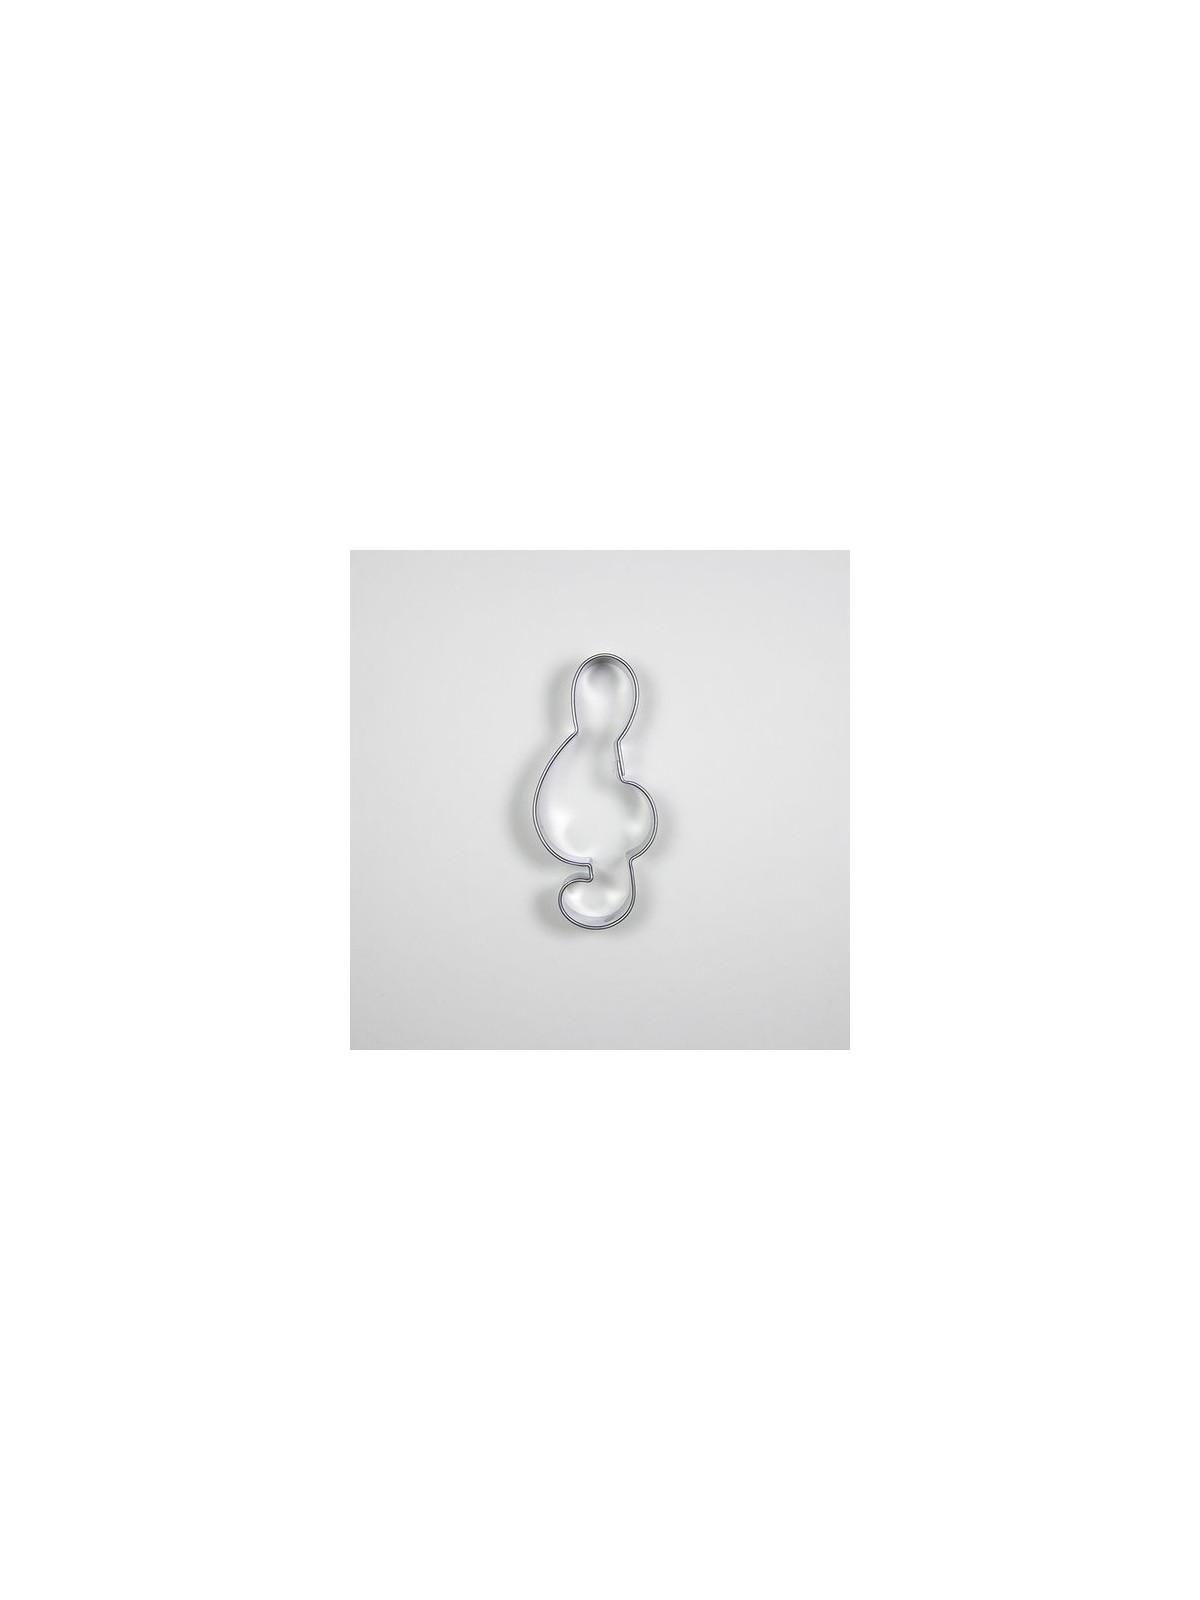 Stainless steel cutter - treble clef